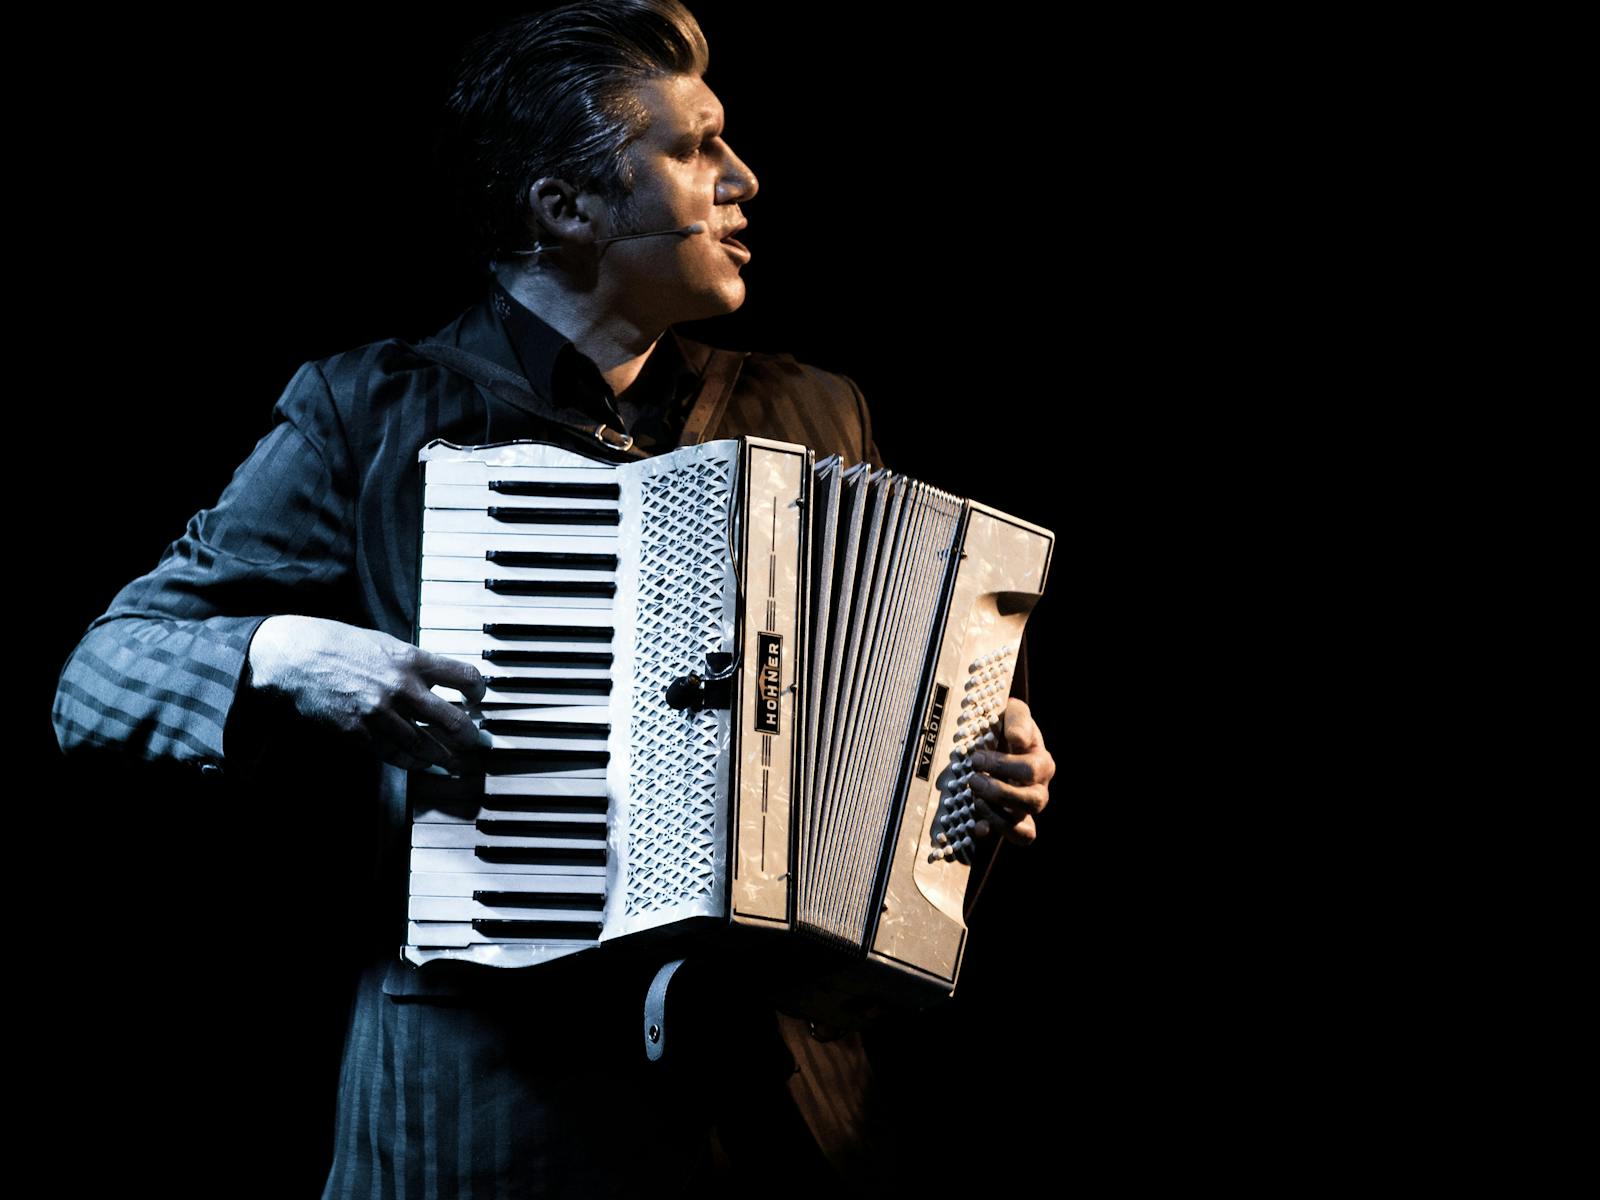 A man plays an accordion, bathed in a golden light and darkness.